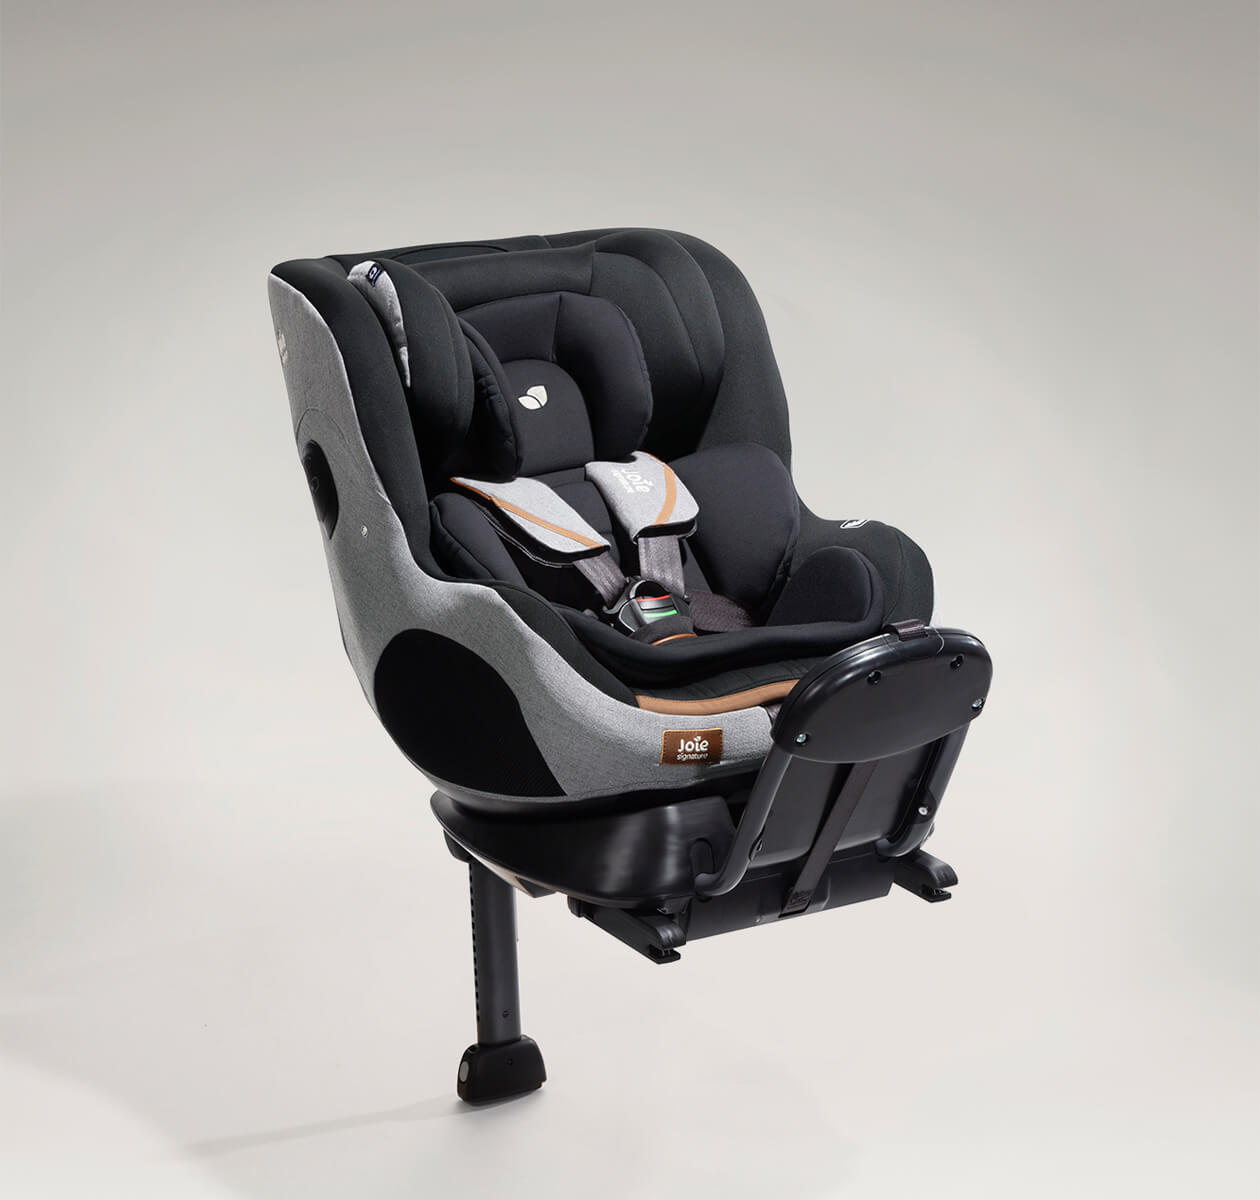  Joie Signature I-Prodigi in carbon gray and black with infant insert in and on a right angle